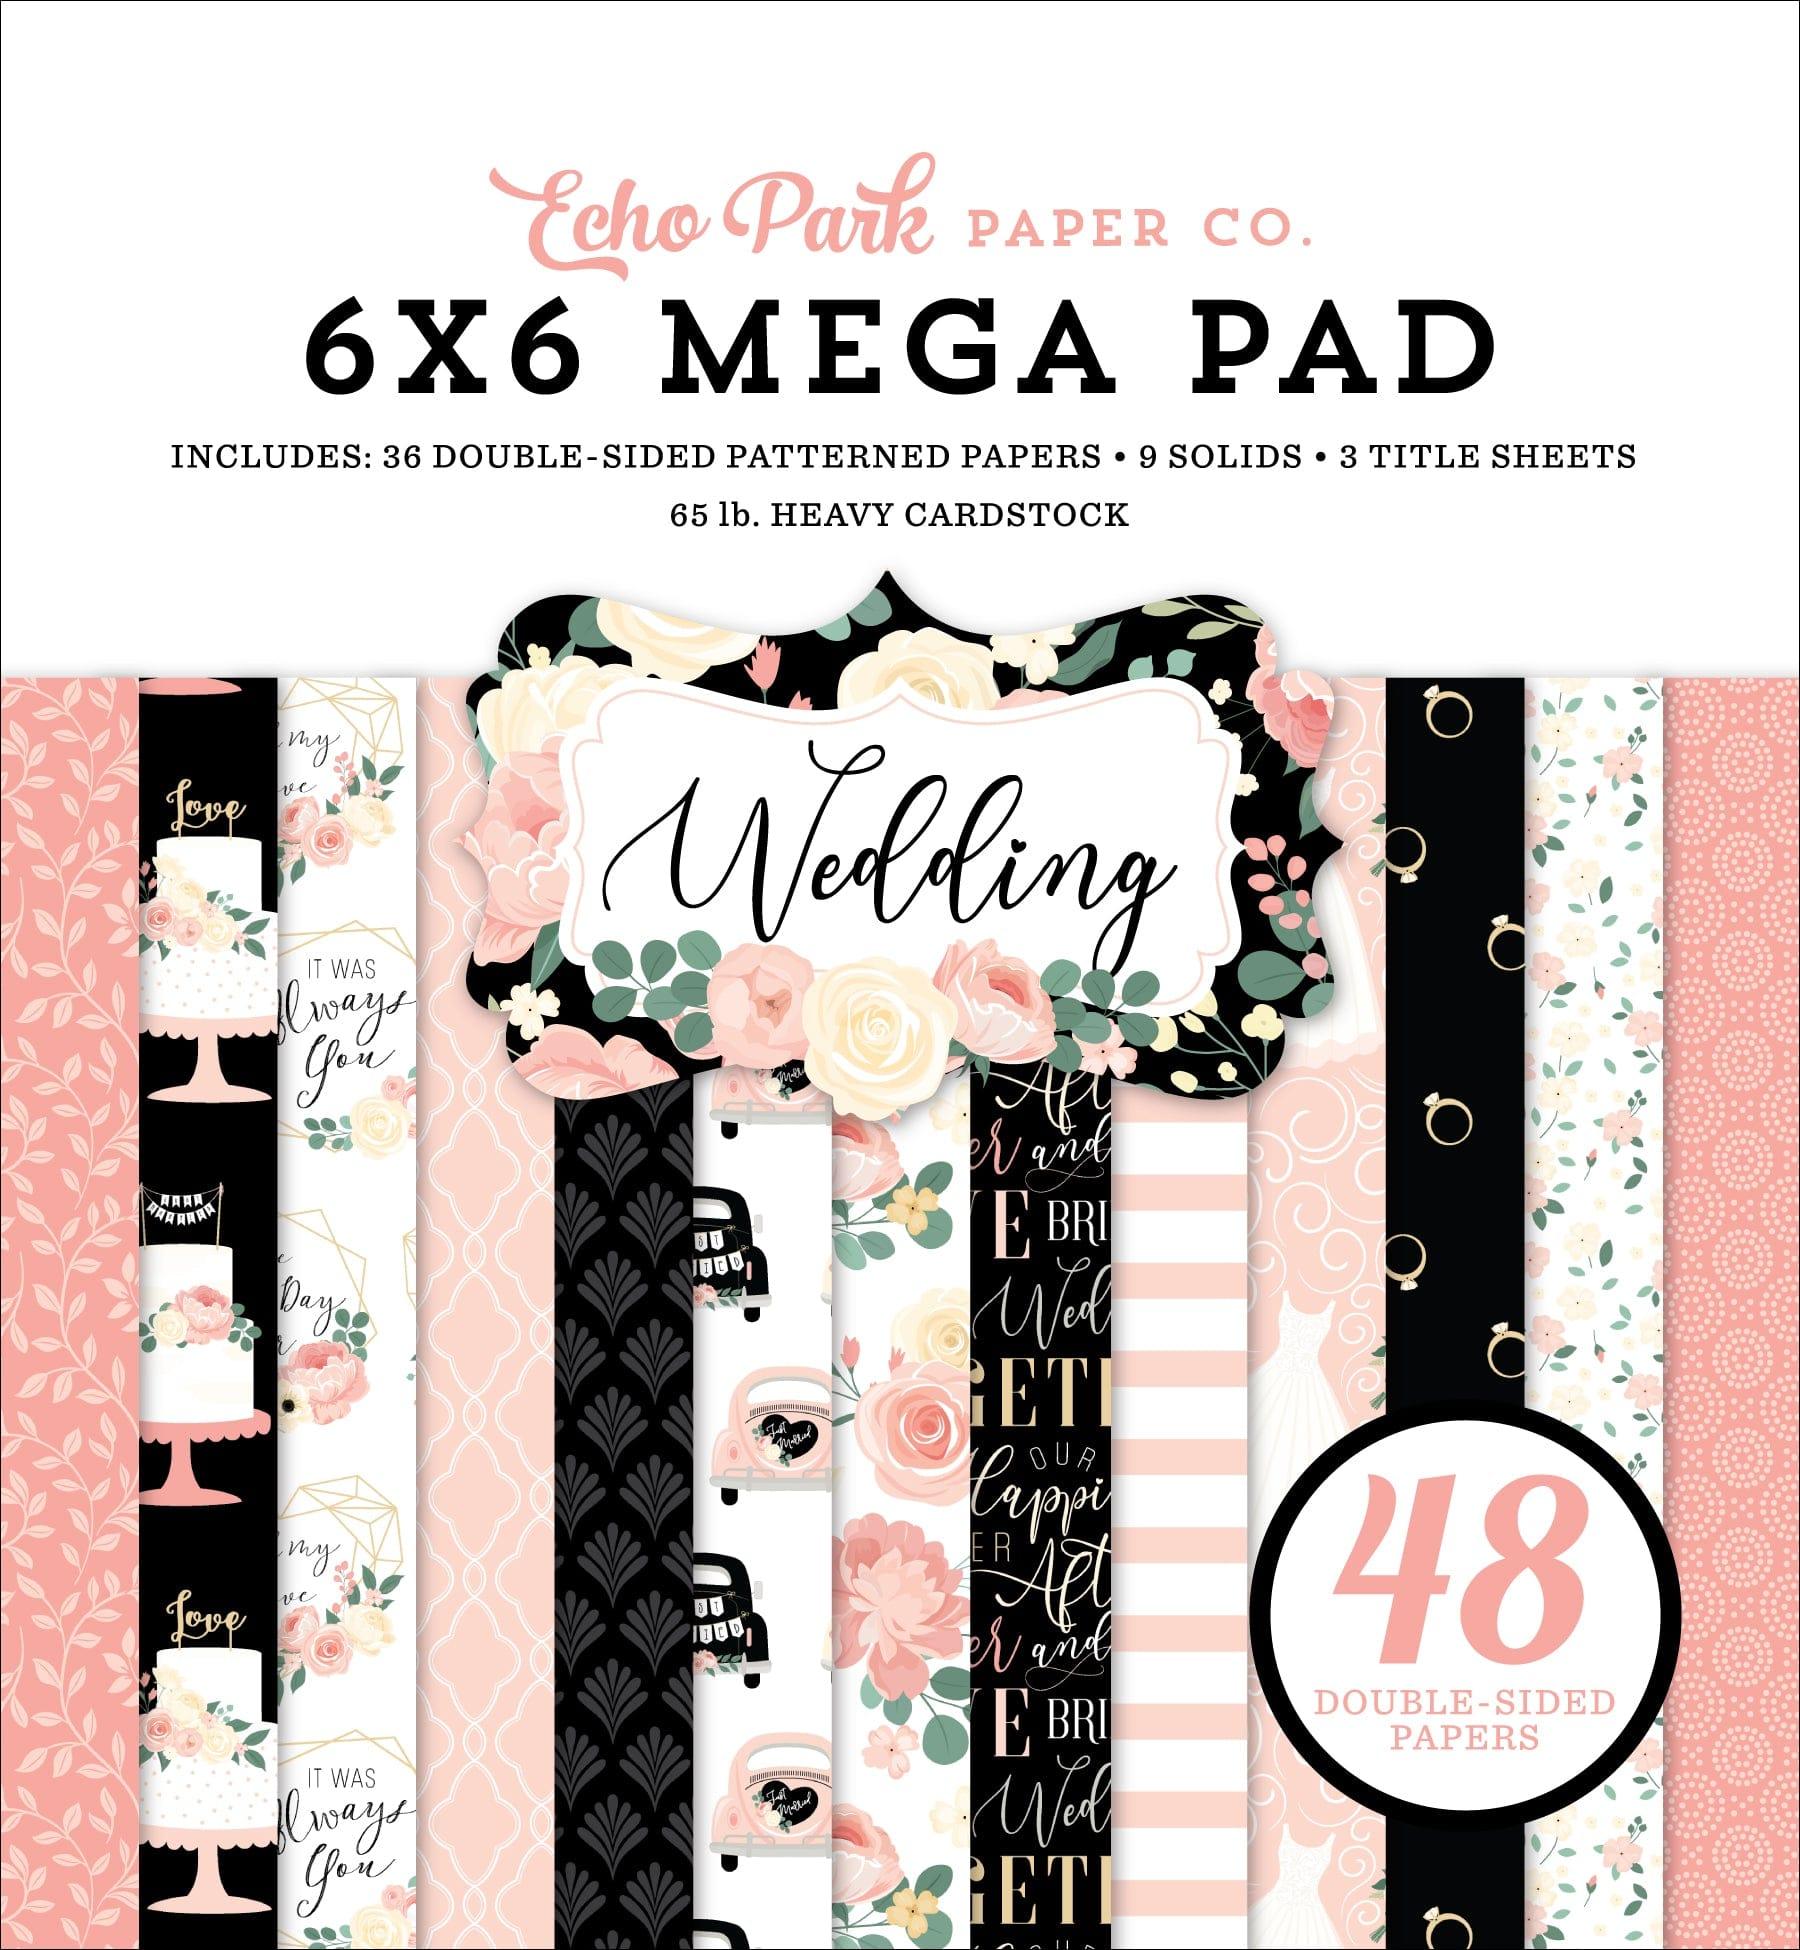 Wedding Collection 6 x 6 Mega Paper Pad by Echo Park Paper - 48 Double-Sided Papers - Scrapbook Supply Companies